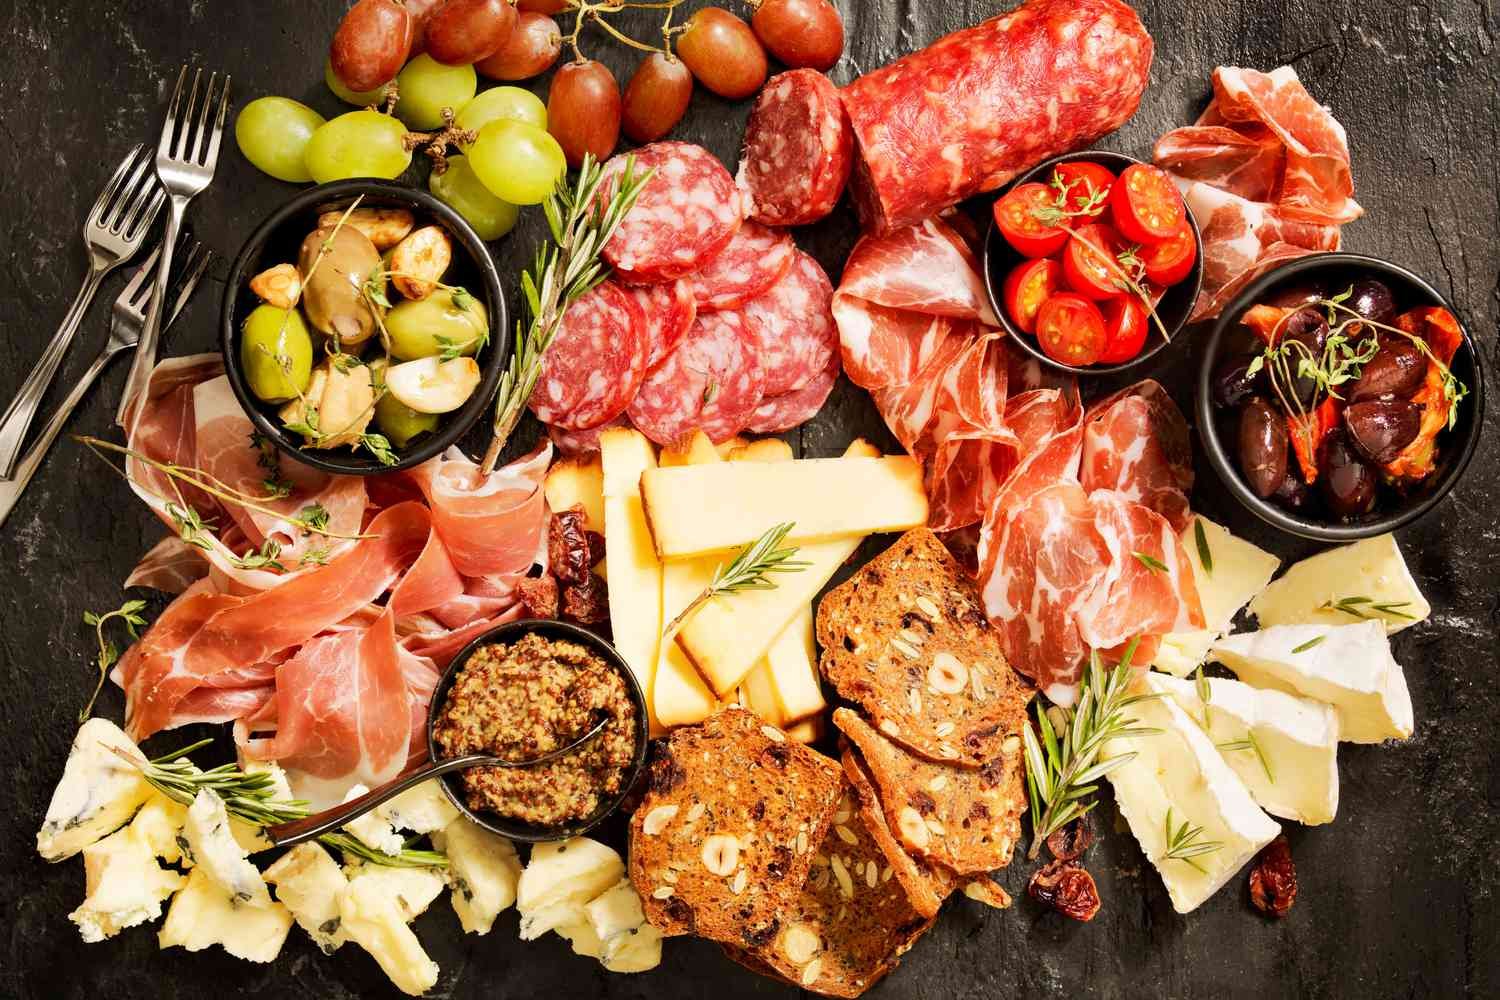 How to Make a Charcuterie and Cheese Board